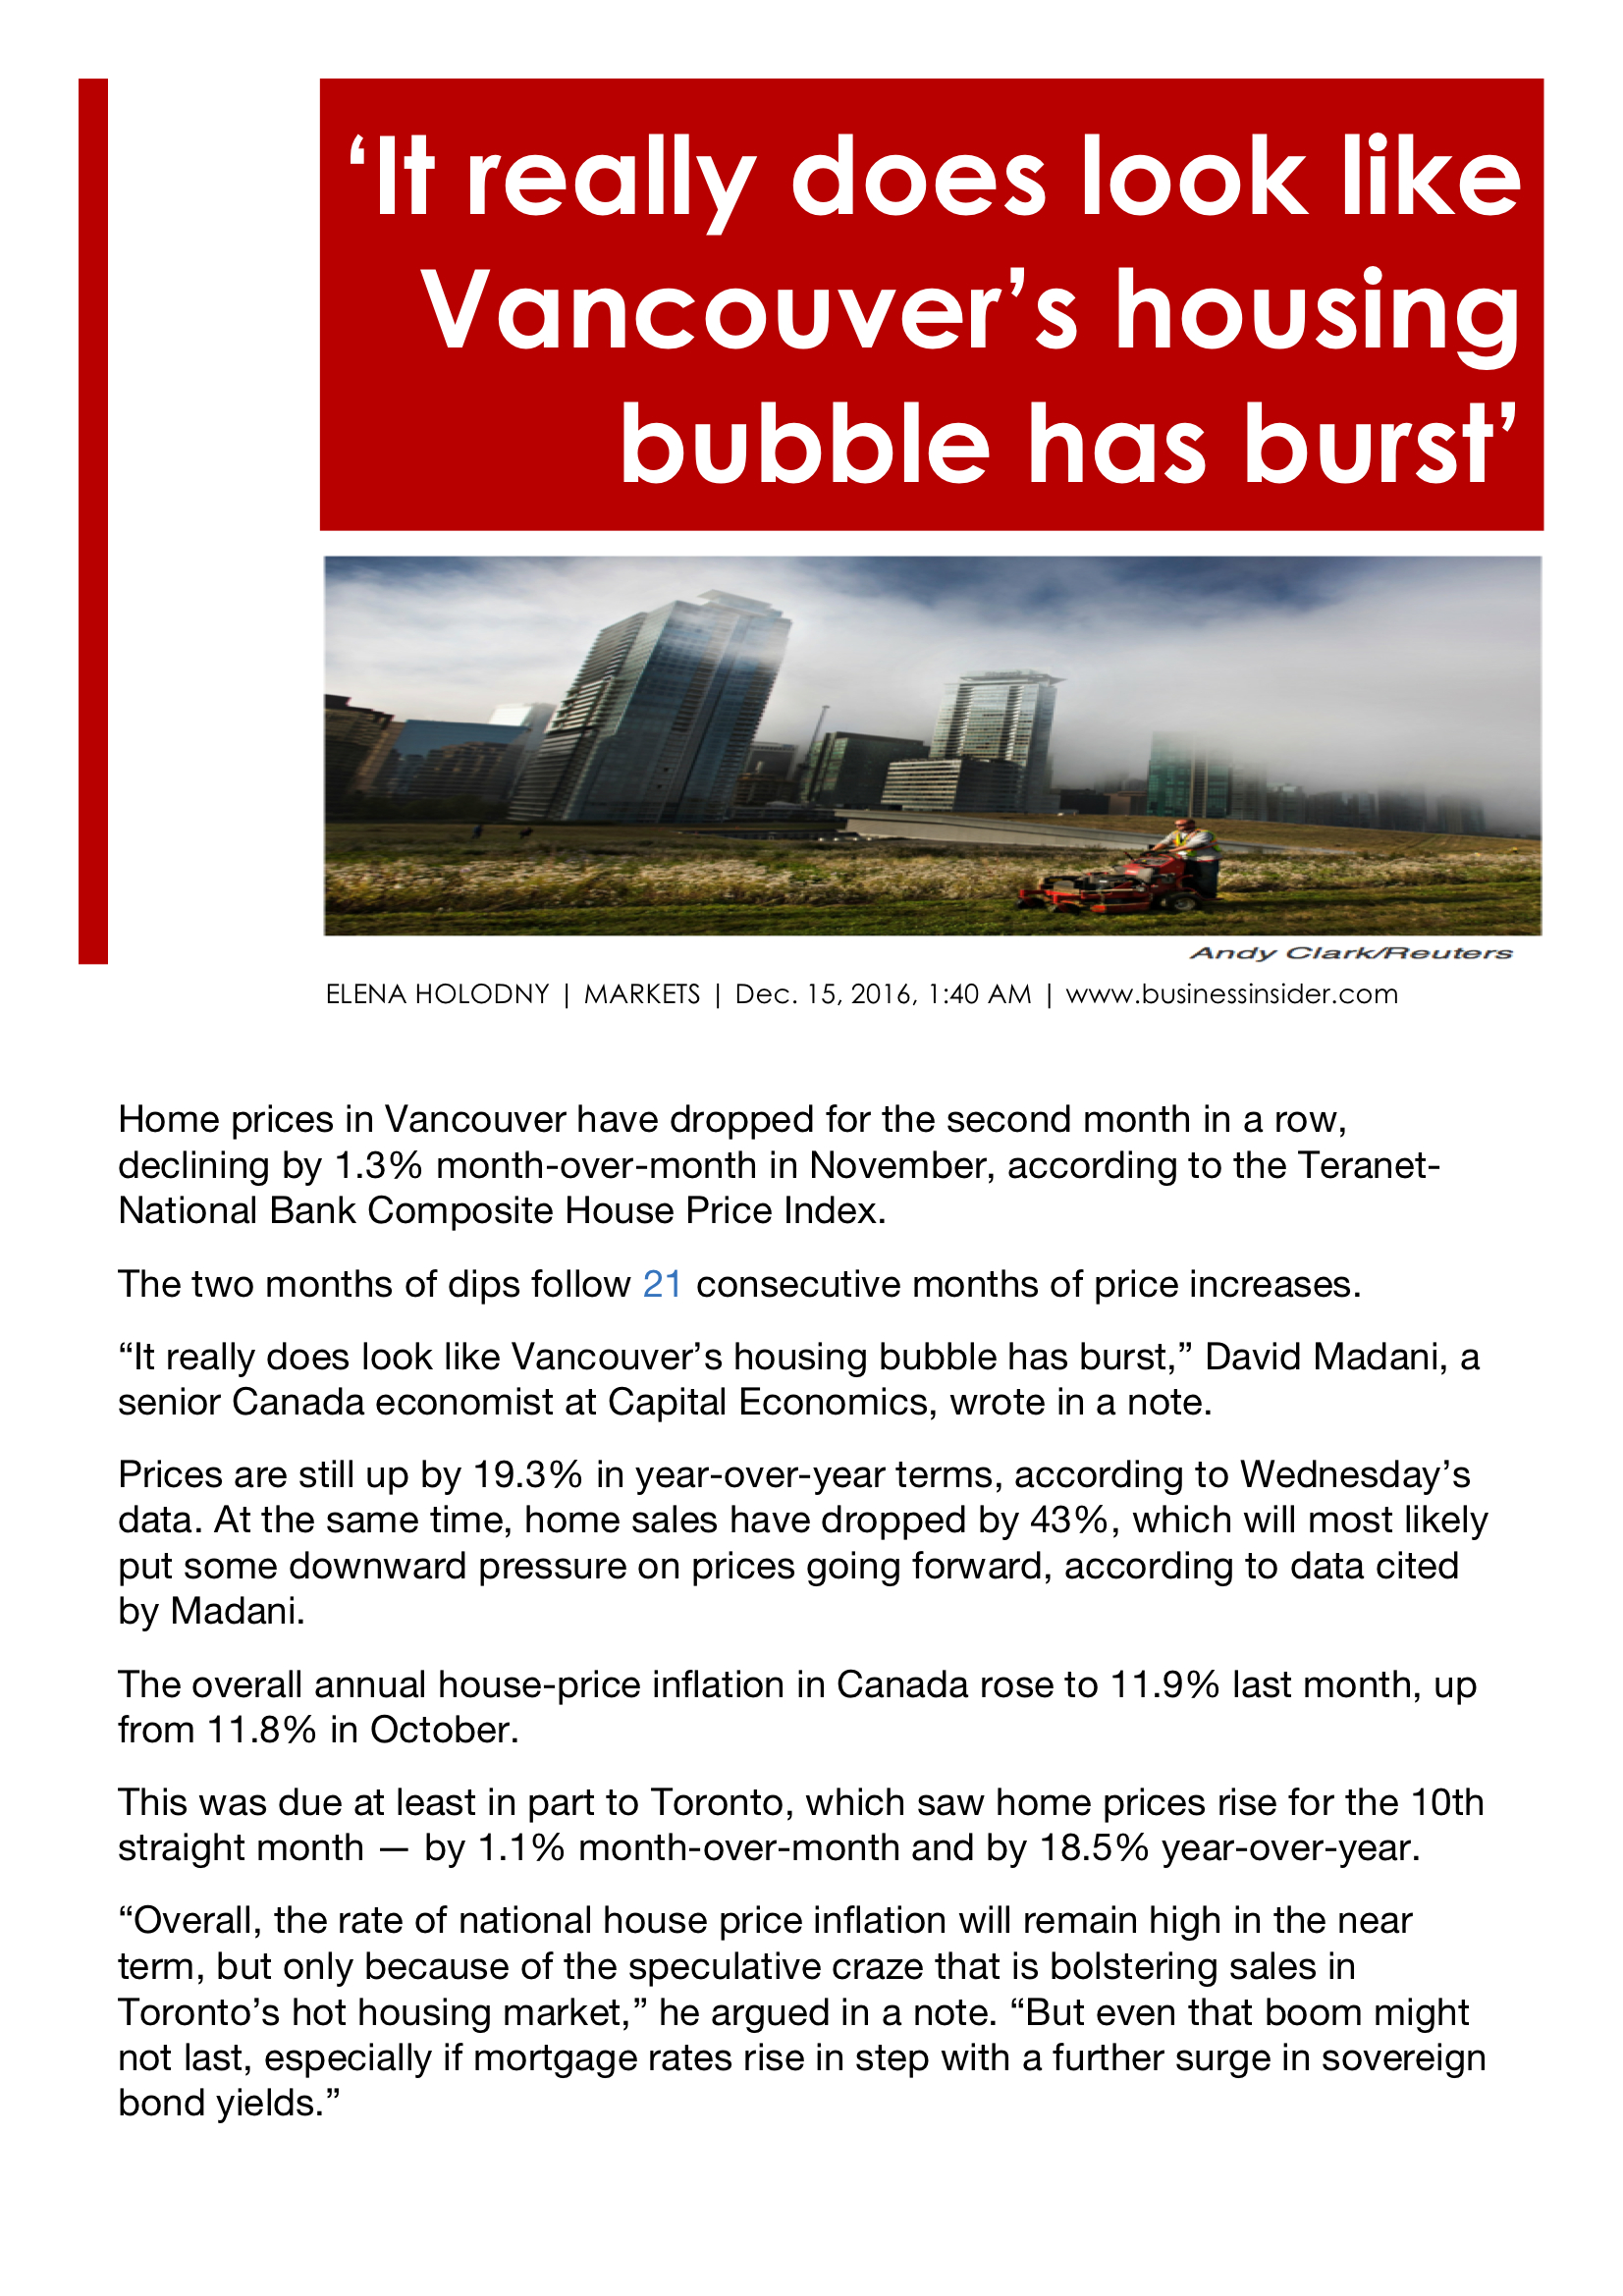 It Really does Look Like Vancouver’s Housing Bubble has Burst